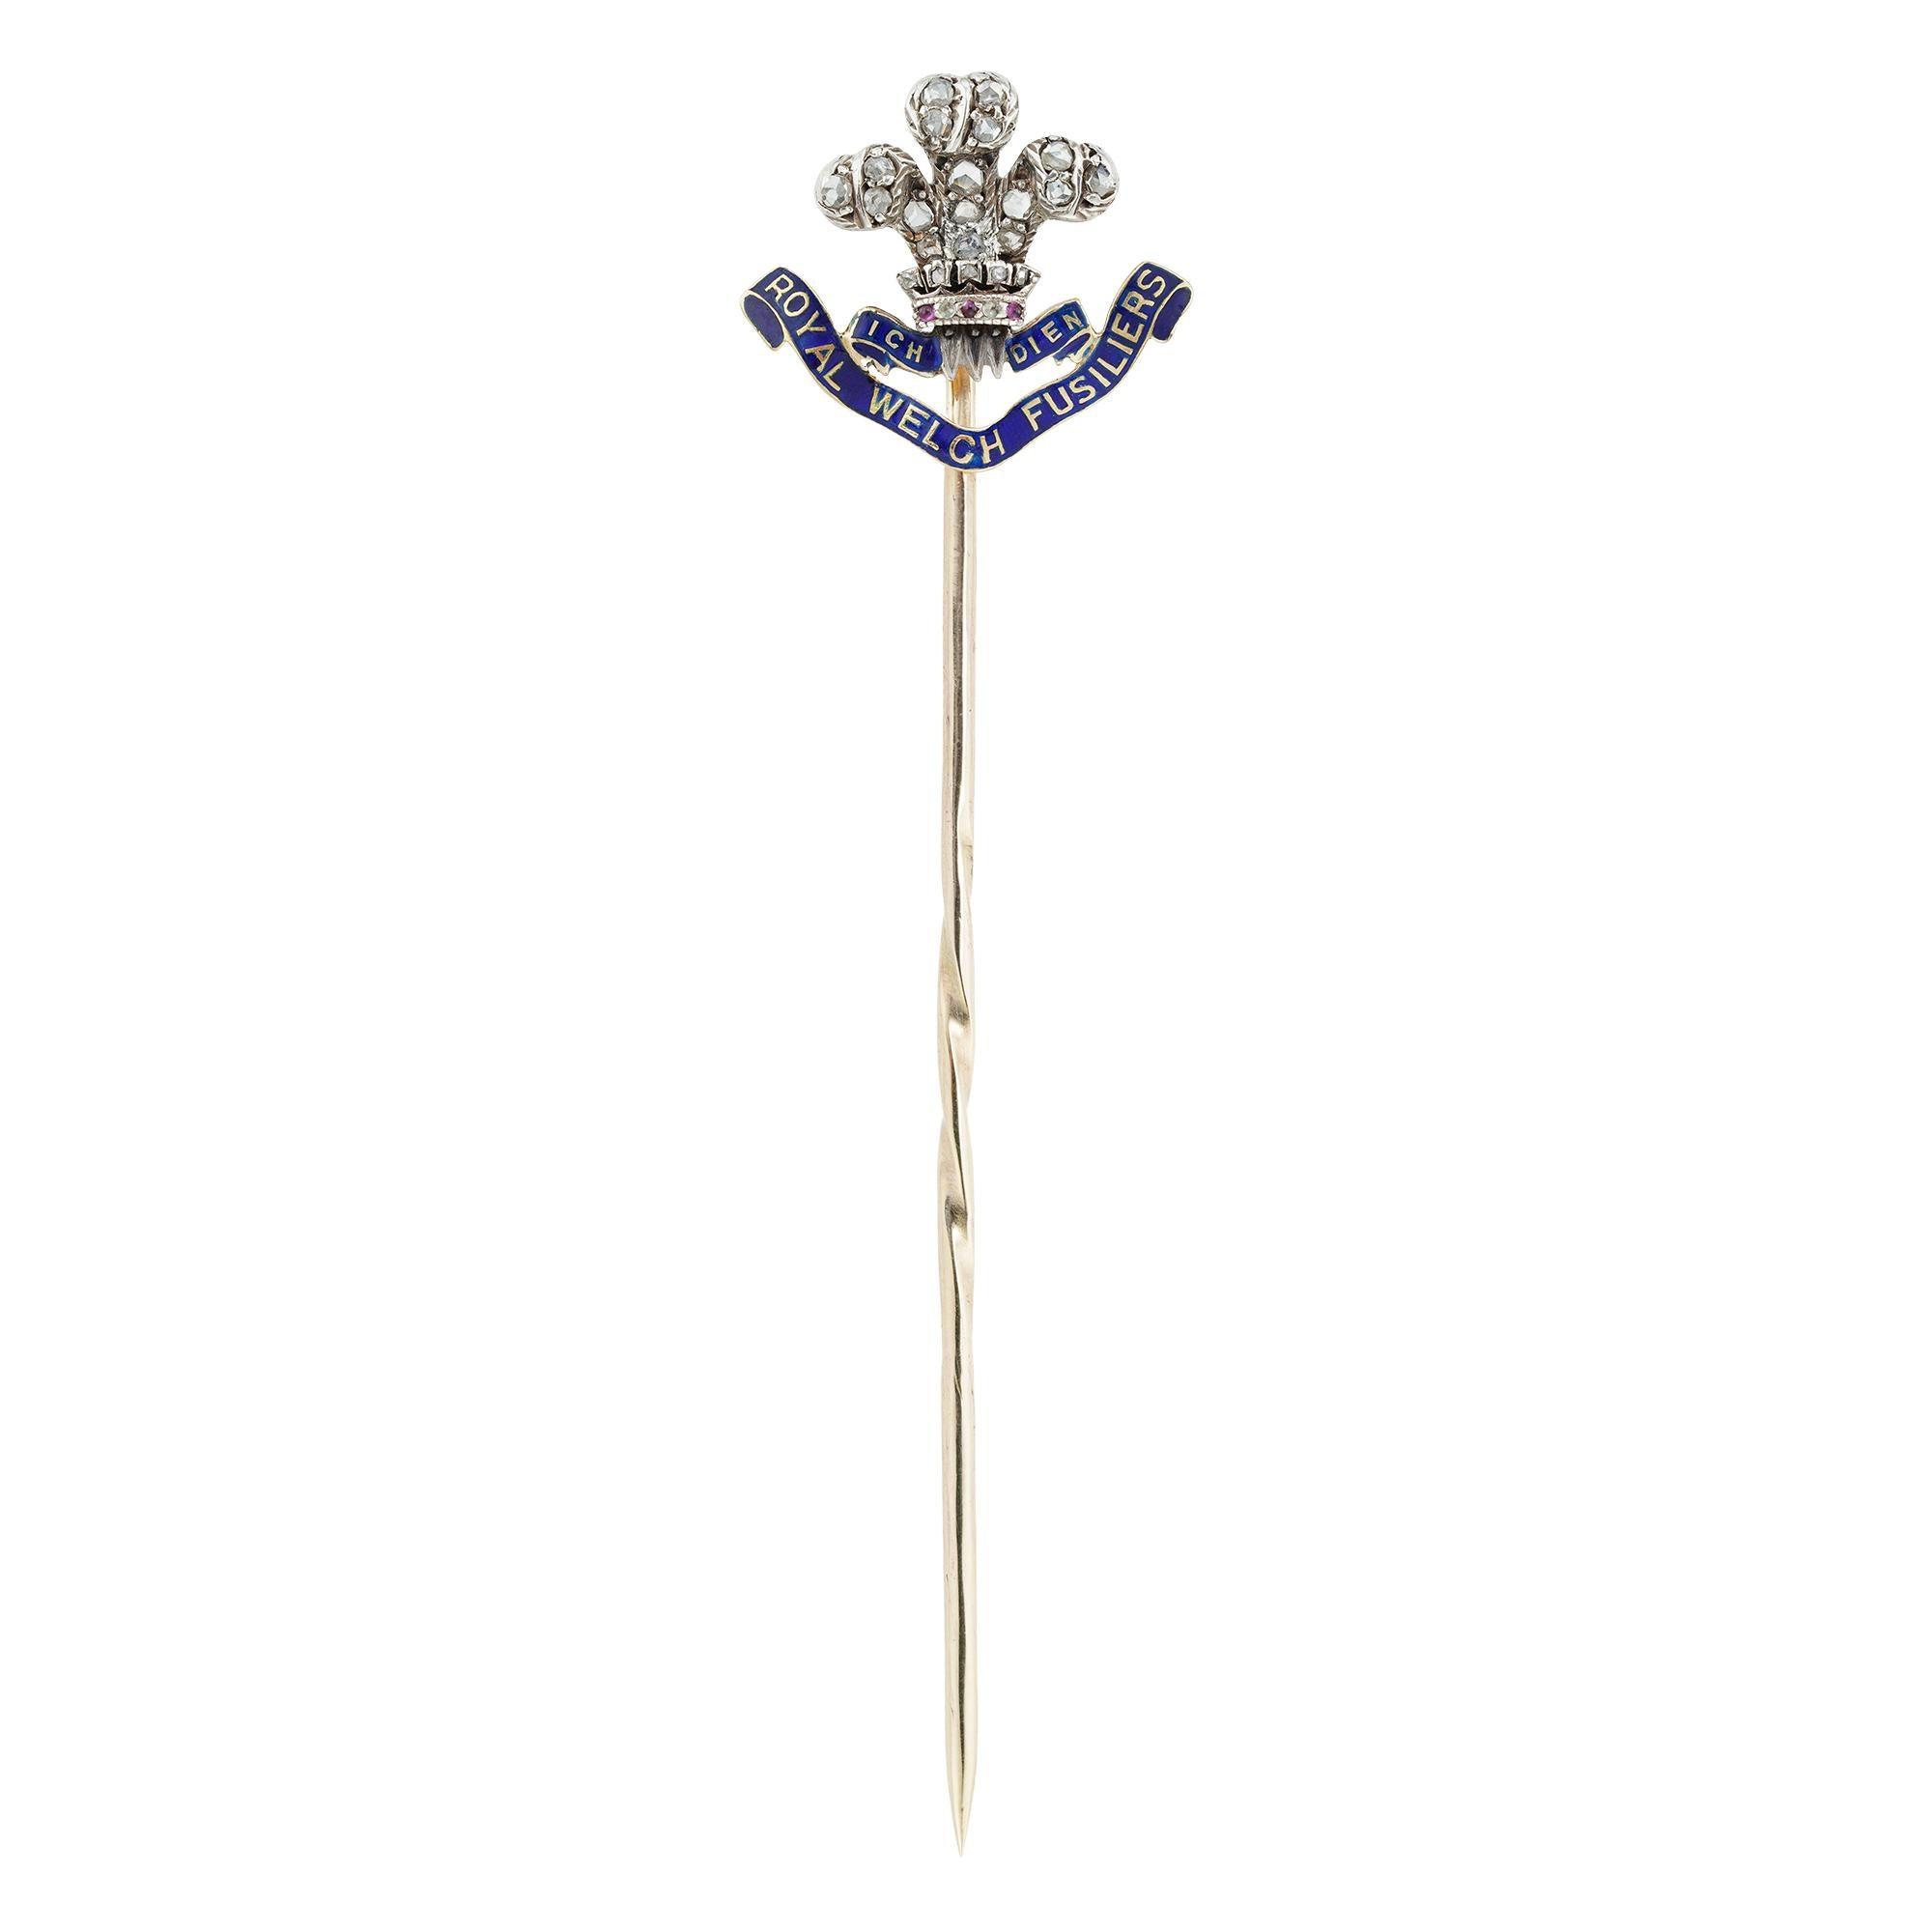 A late Victorian Royal Welch Fusiliers stick pin bearing the motto “Ich Dien” on a blue enamel banner with diamond set Prince of Wales feathers above, circa 1900, measuring 70mmx19mm, gross weight 2.5g.

This antique pin is in very good condition,